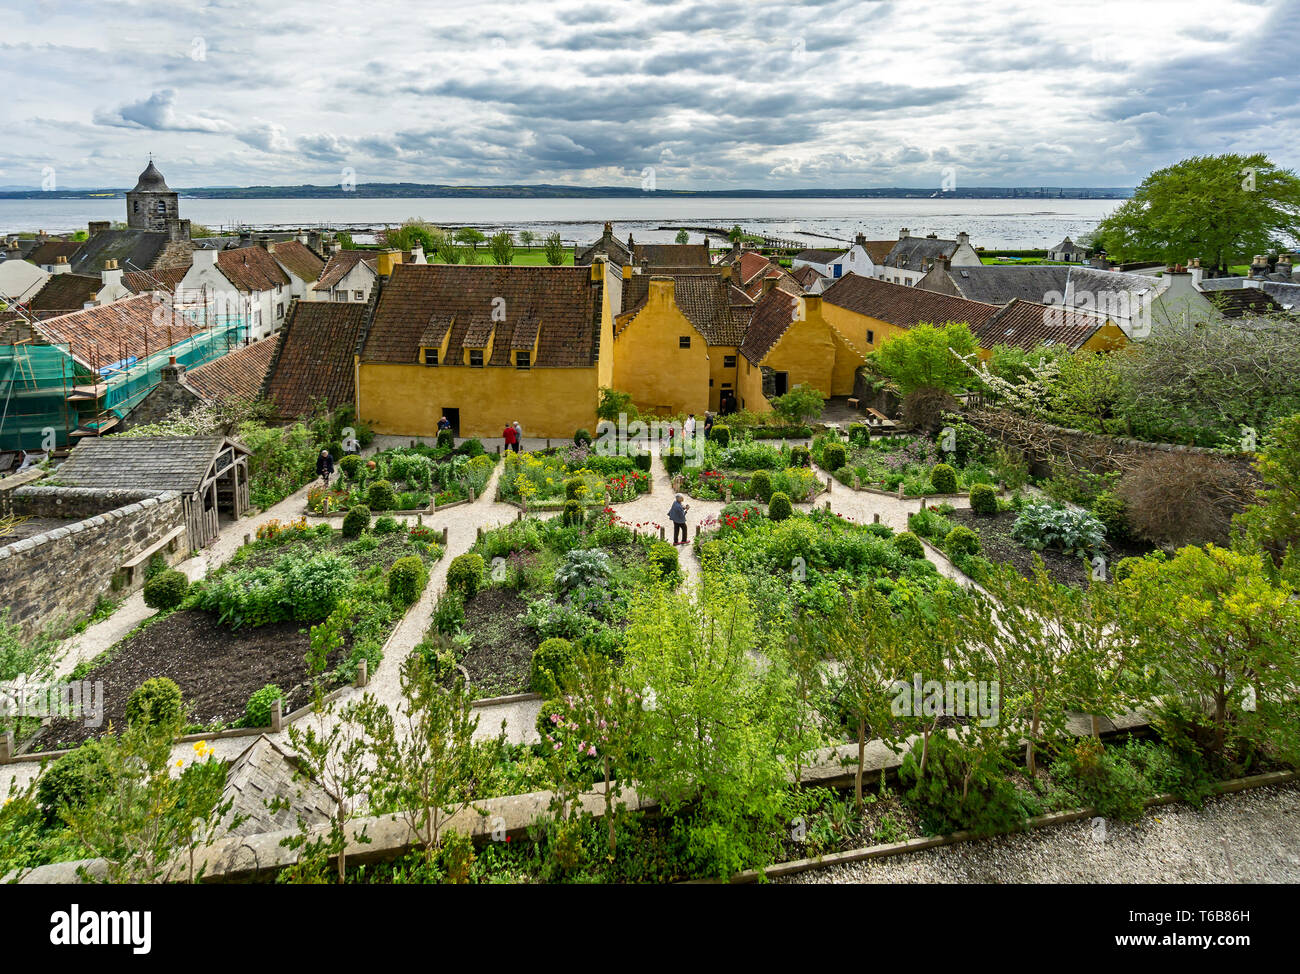 Culross Palace in NTS town The Royal Burgh of Culross in Fife Scotland UK with rear garden Stock Photo